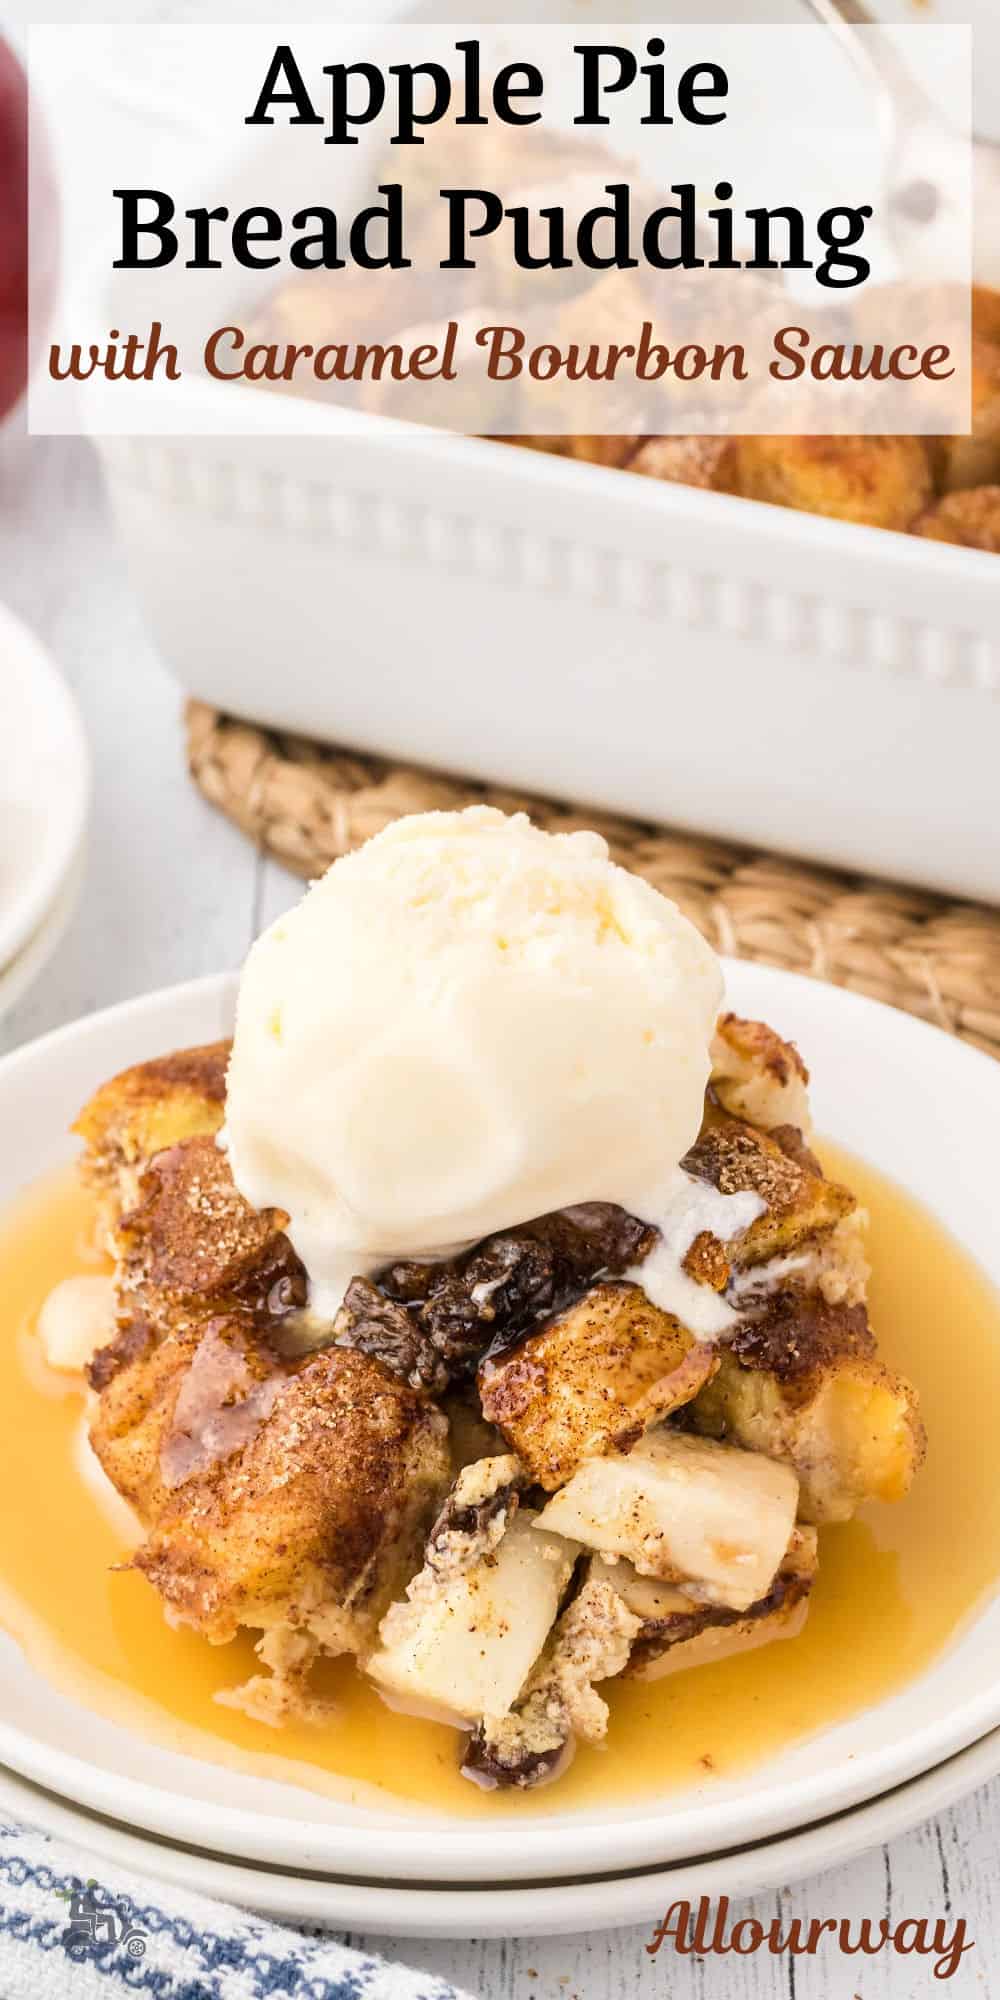 Apple pie gets a brilliant makeover in this delectable creation! Picture velvety brioche bread pudding infused with warm apple pie spices, generously coated in a luxurious caramel bourbon sauce. Once you try this mouthwatering treat, you'll never look at apple pie the same way again!